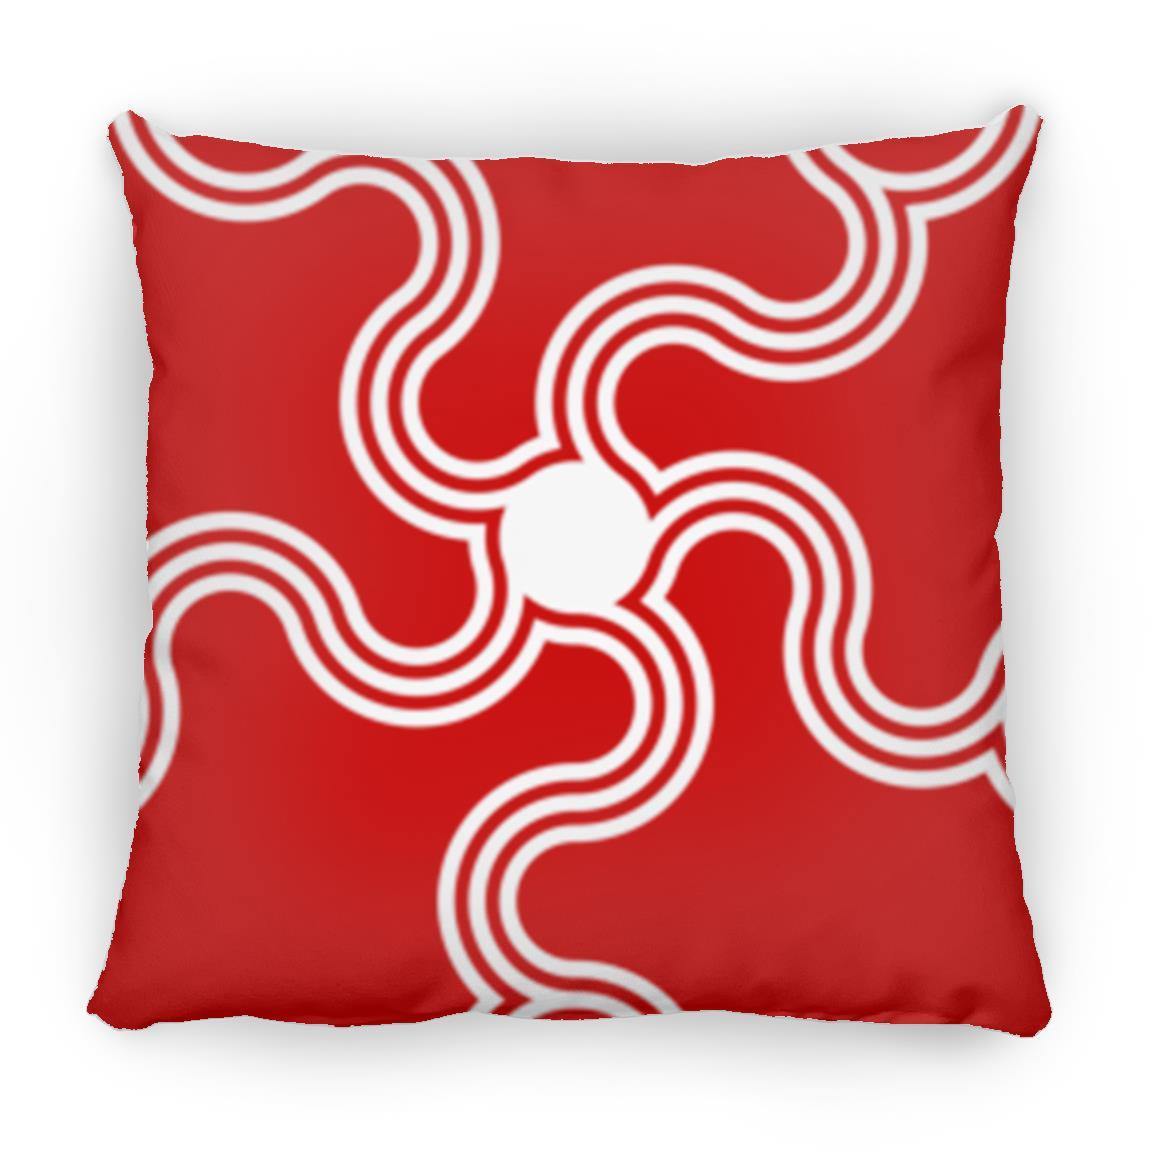 Crop Circle Pillow - Willoughby - Shapes of Wisdom